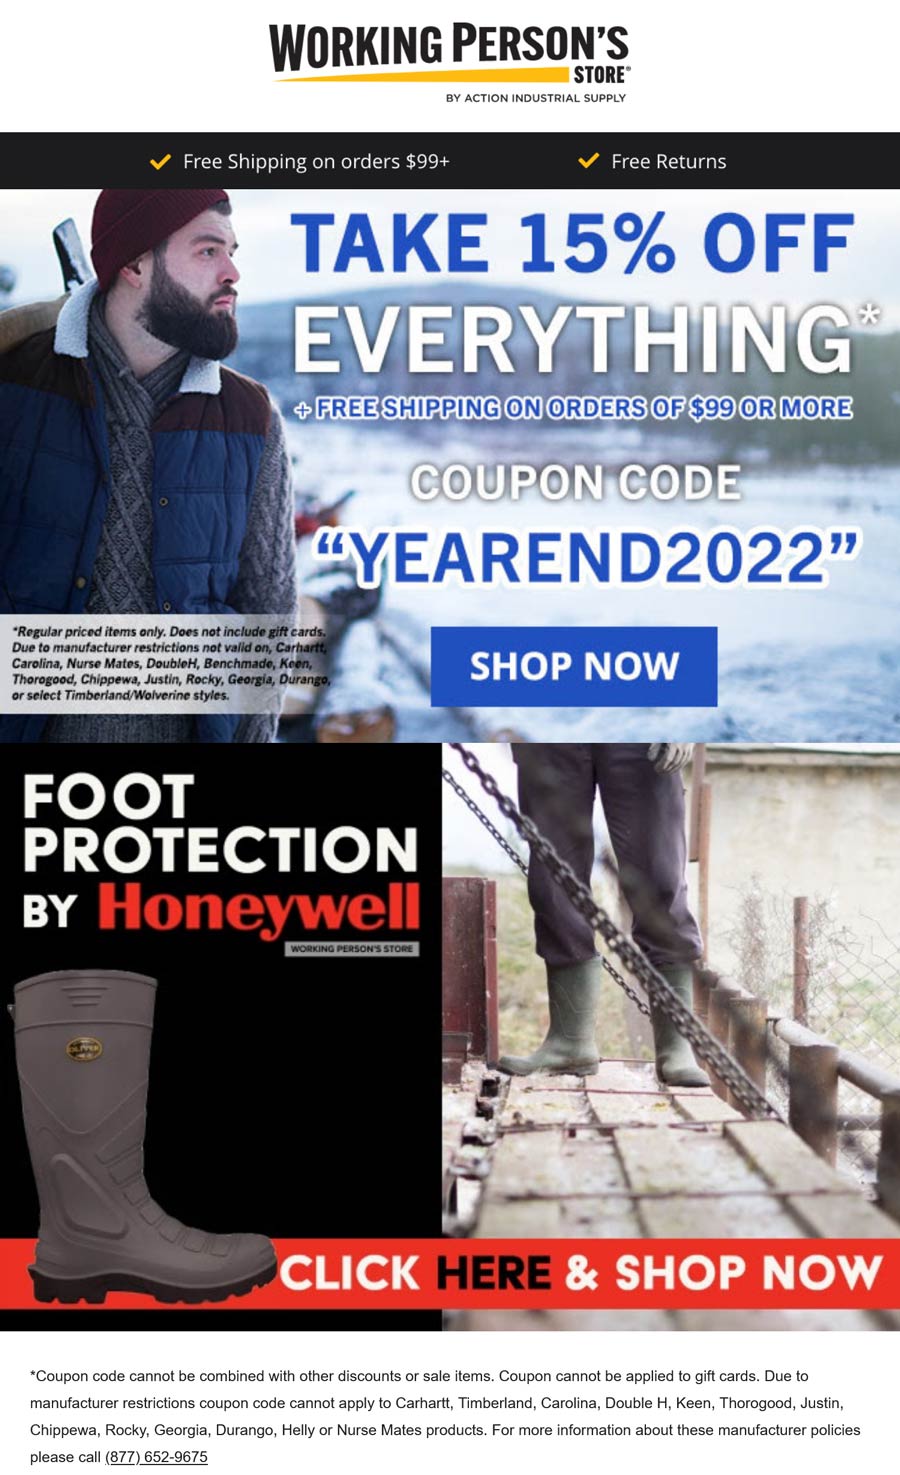 Working Persons Store coupons & promo code for [February 2023]